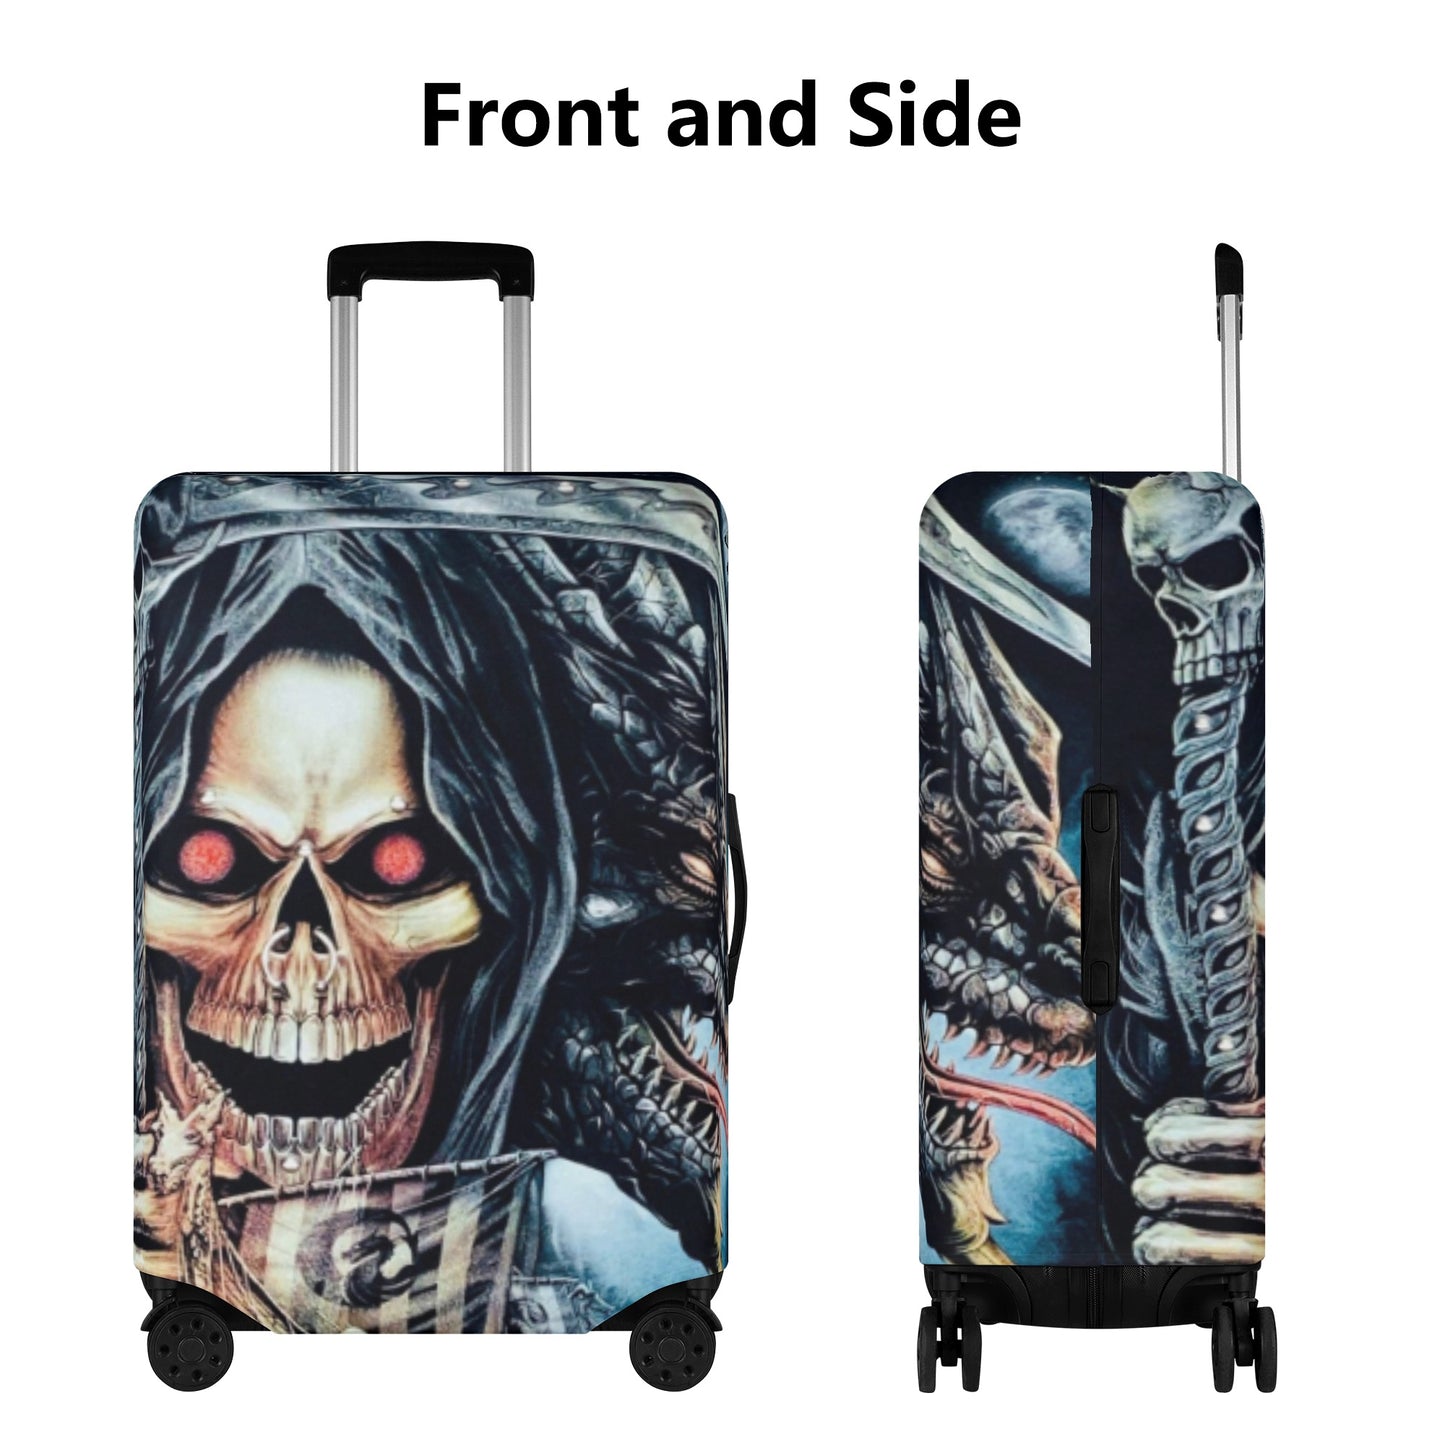 Horror skull Grim reaper luggage cover, skeleton suitcase cover protector